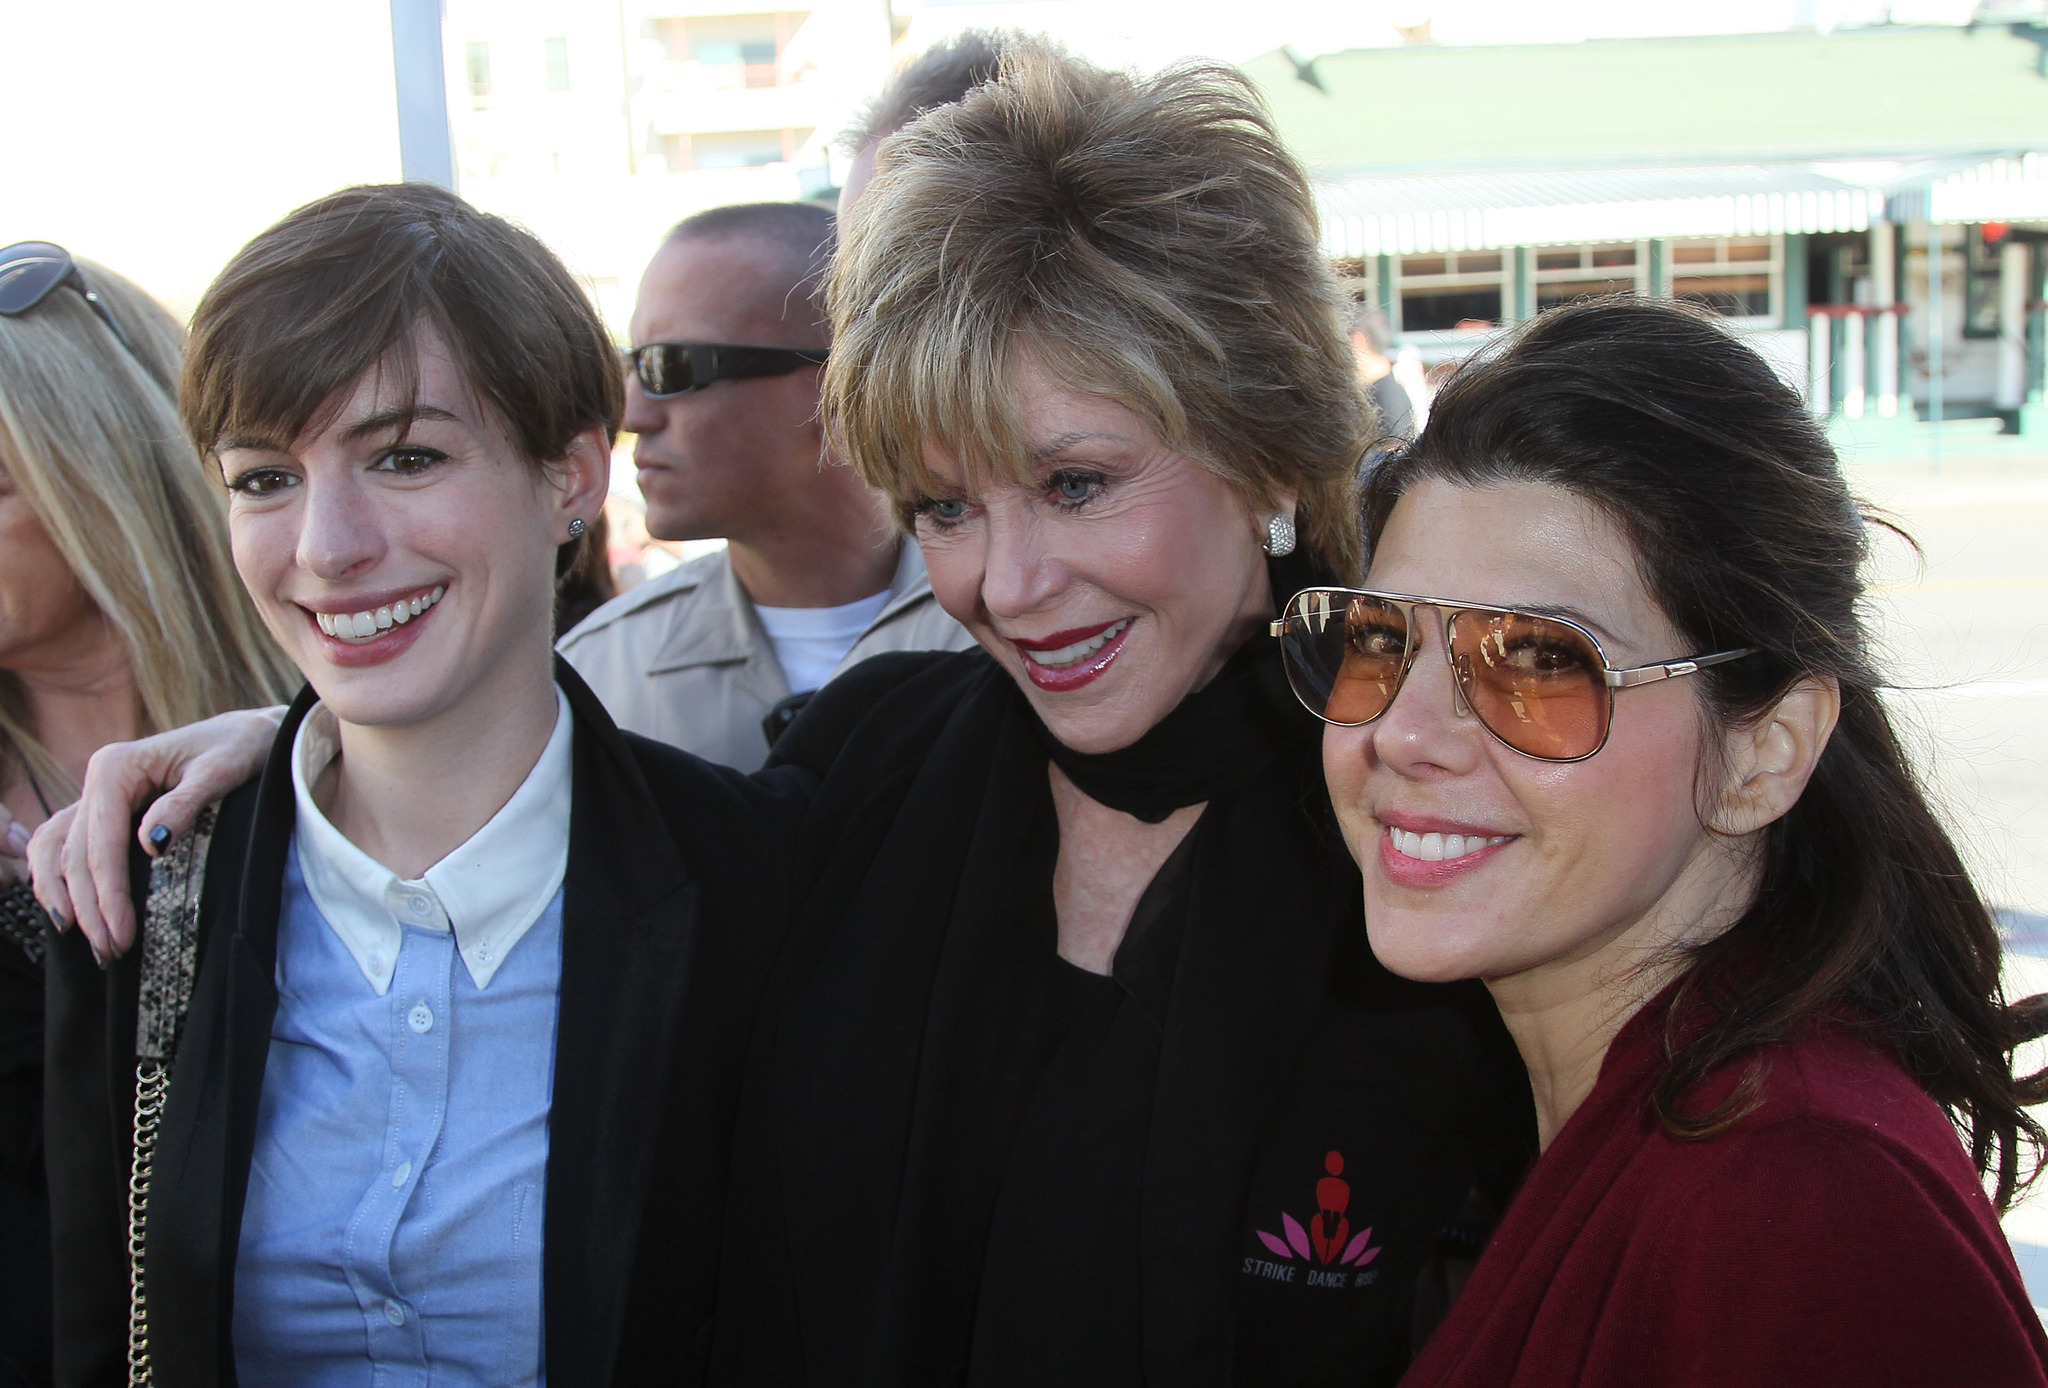 Anne Hathaway, Jane Fonda and Marisa Tomei attend the kick-off for One Billion Rising in West Hollywood on February 14, 2013 in West Hollywood, California.